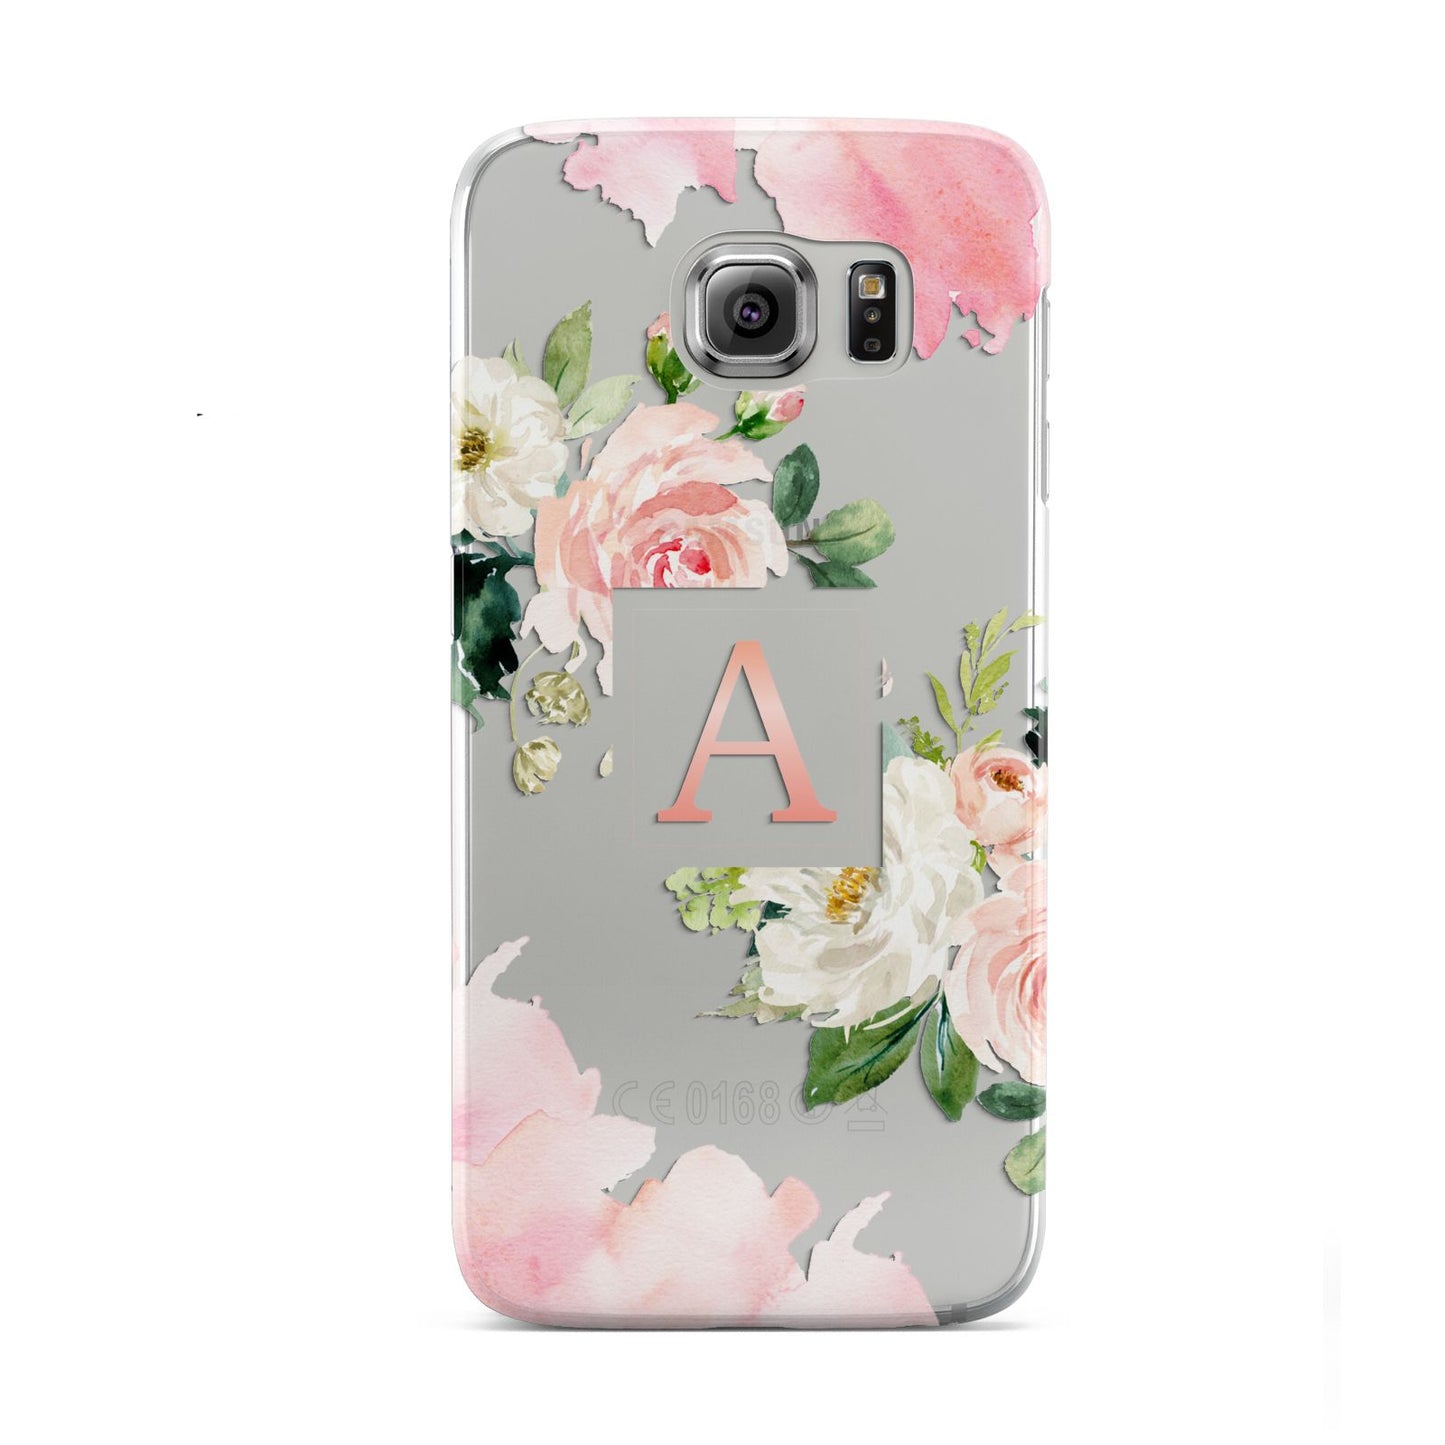 Pink Monogram Floral Roses Personalised Samsung Galaxy S6 Case